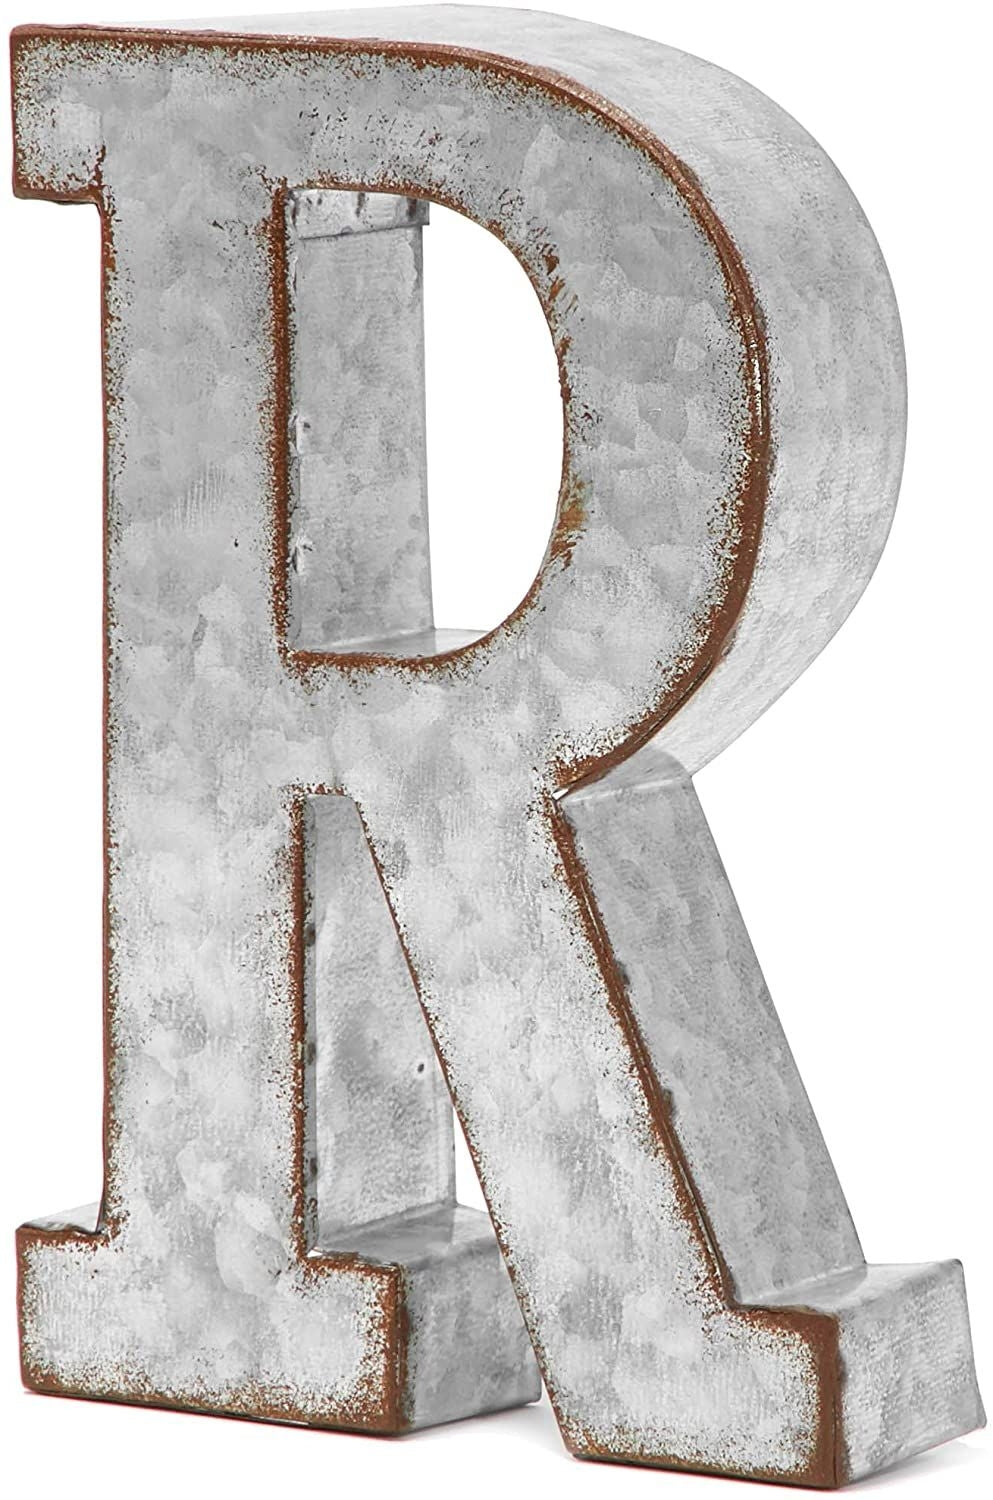 Galvanized Metal Letters for Wall Decor - 3D Letter A for Hanging or  Freestandin